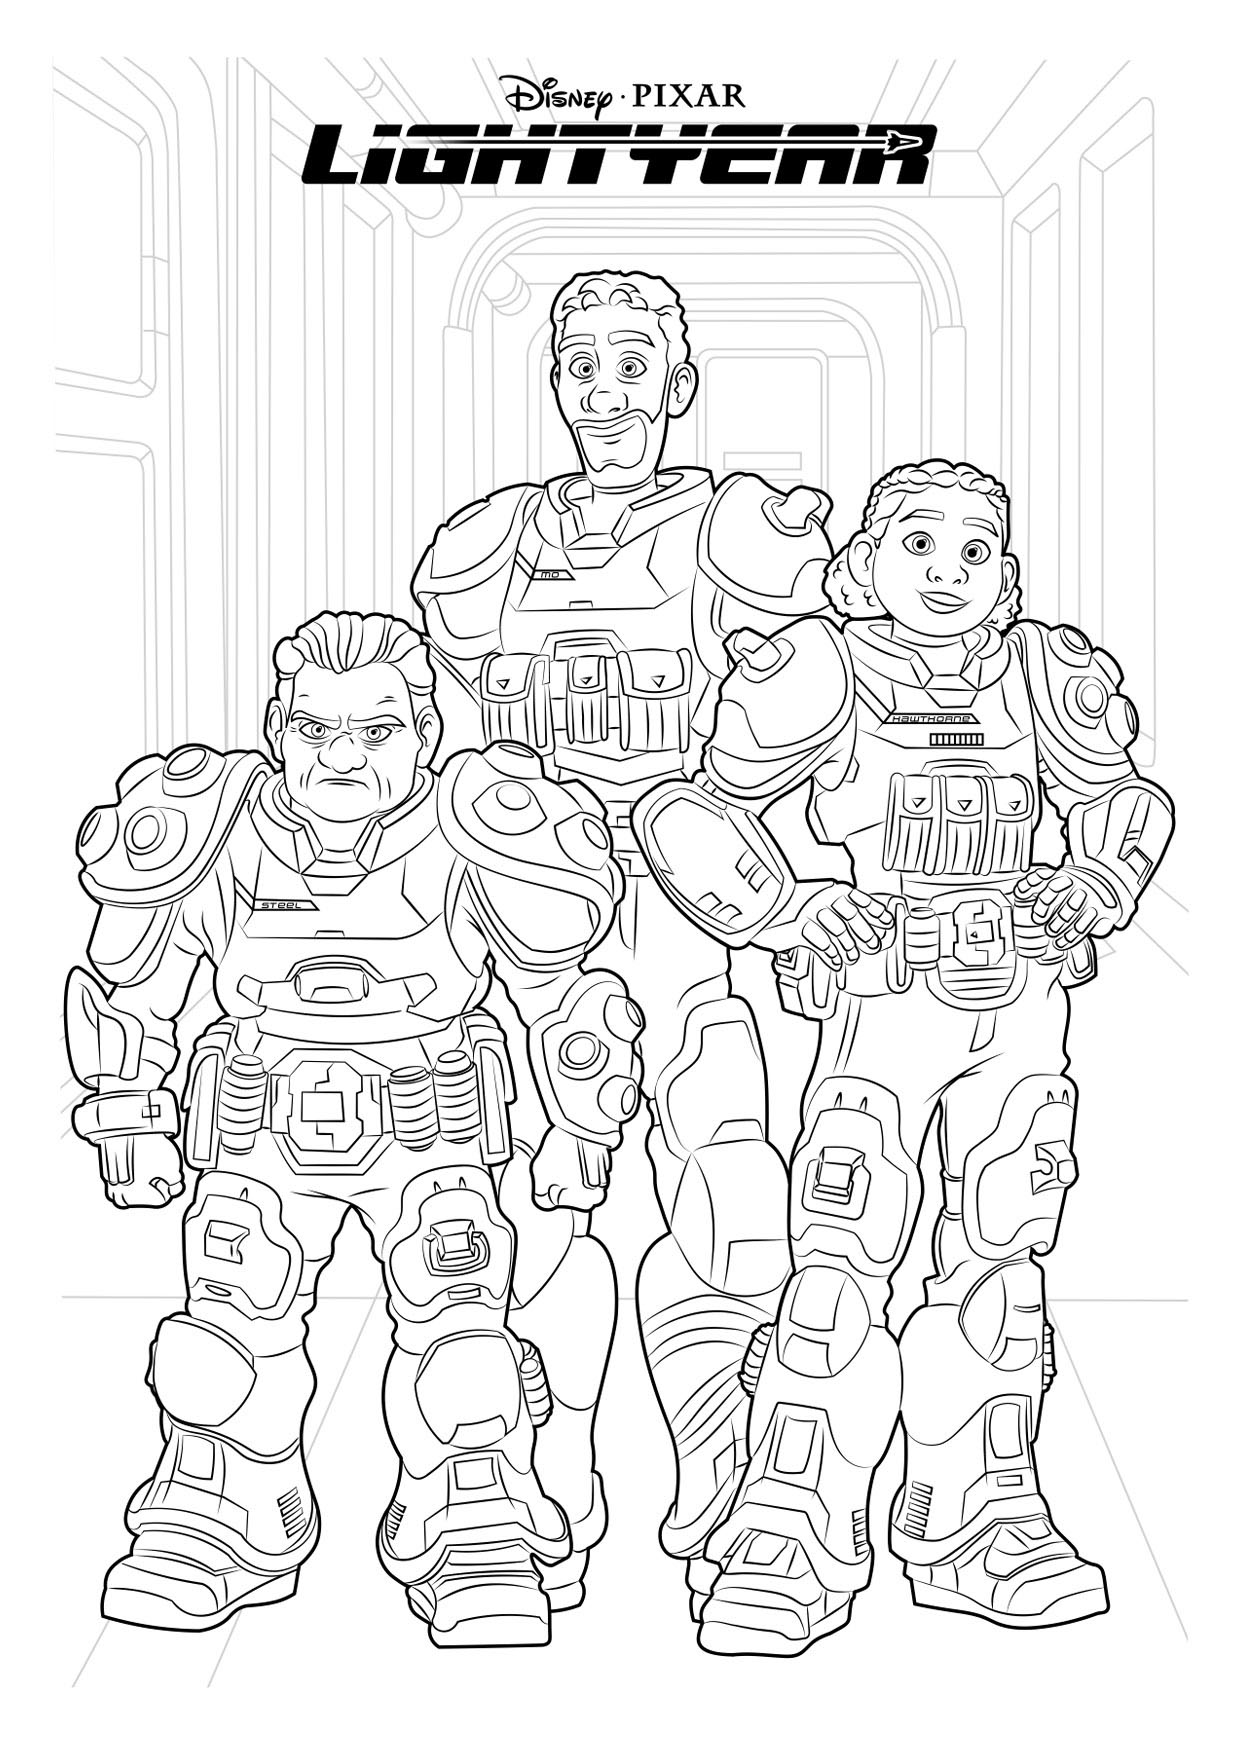 Lightyear space rangers coloring page - Coloring pages